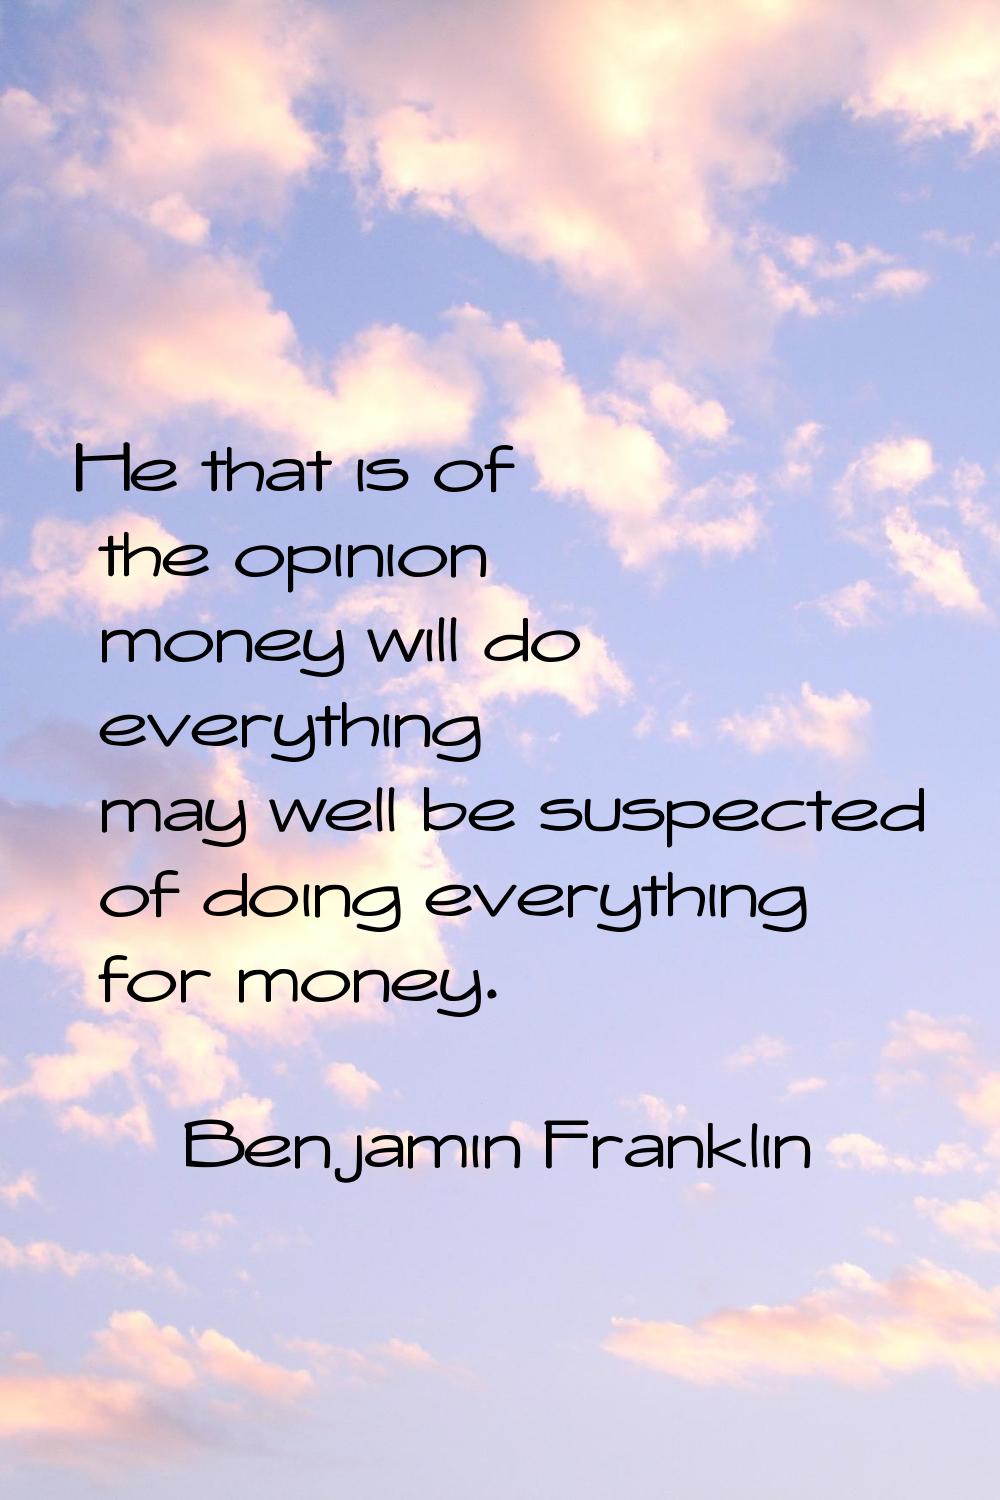 He that is of the opinion money will do everything may well be suspected of doing everything for mo